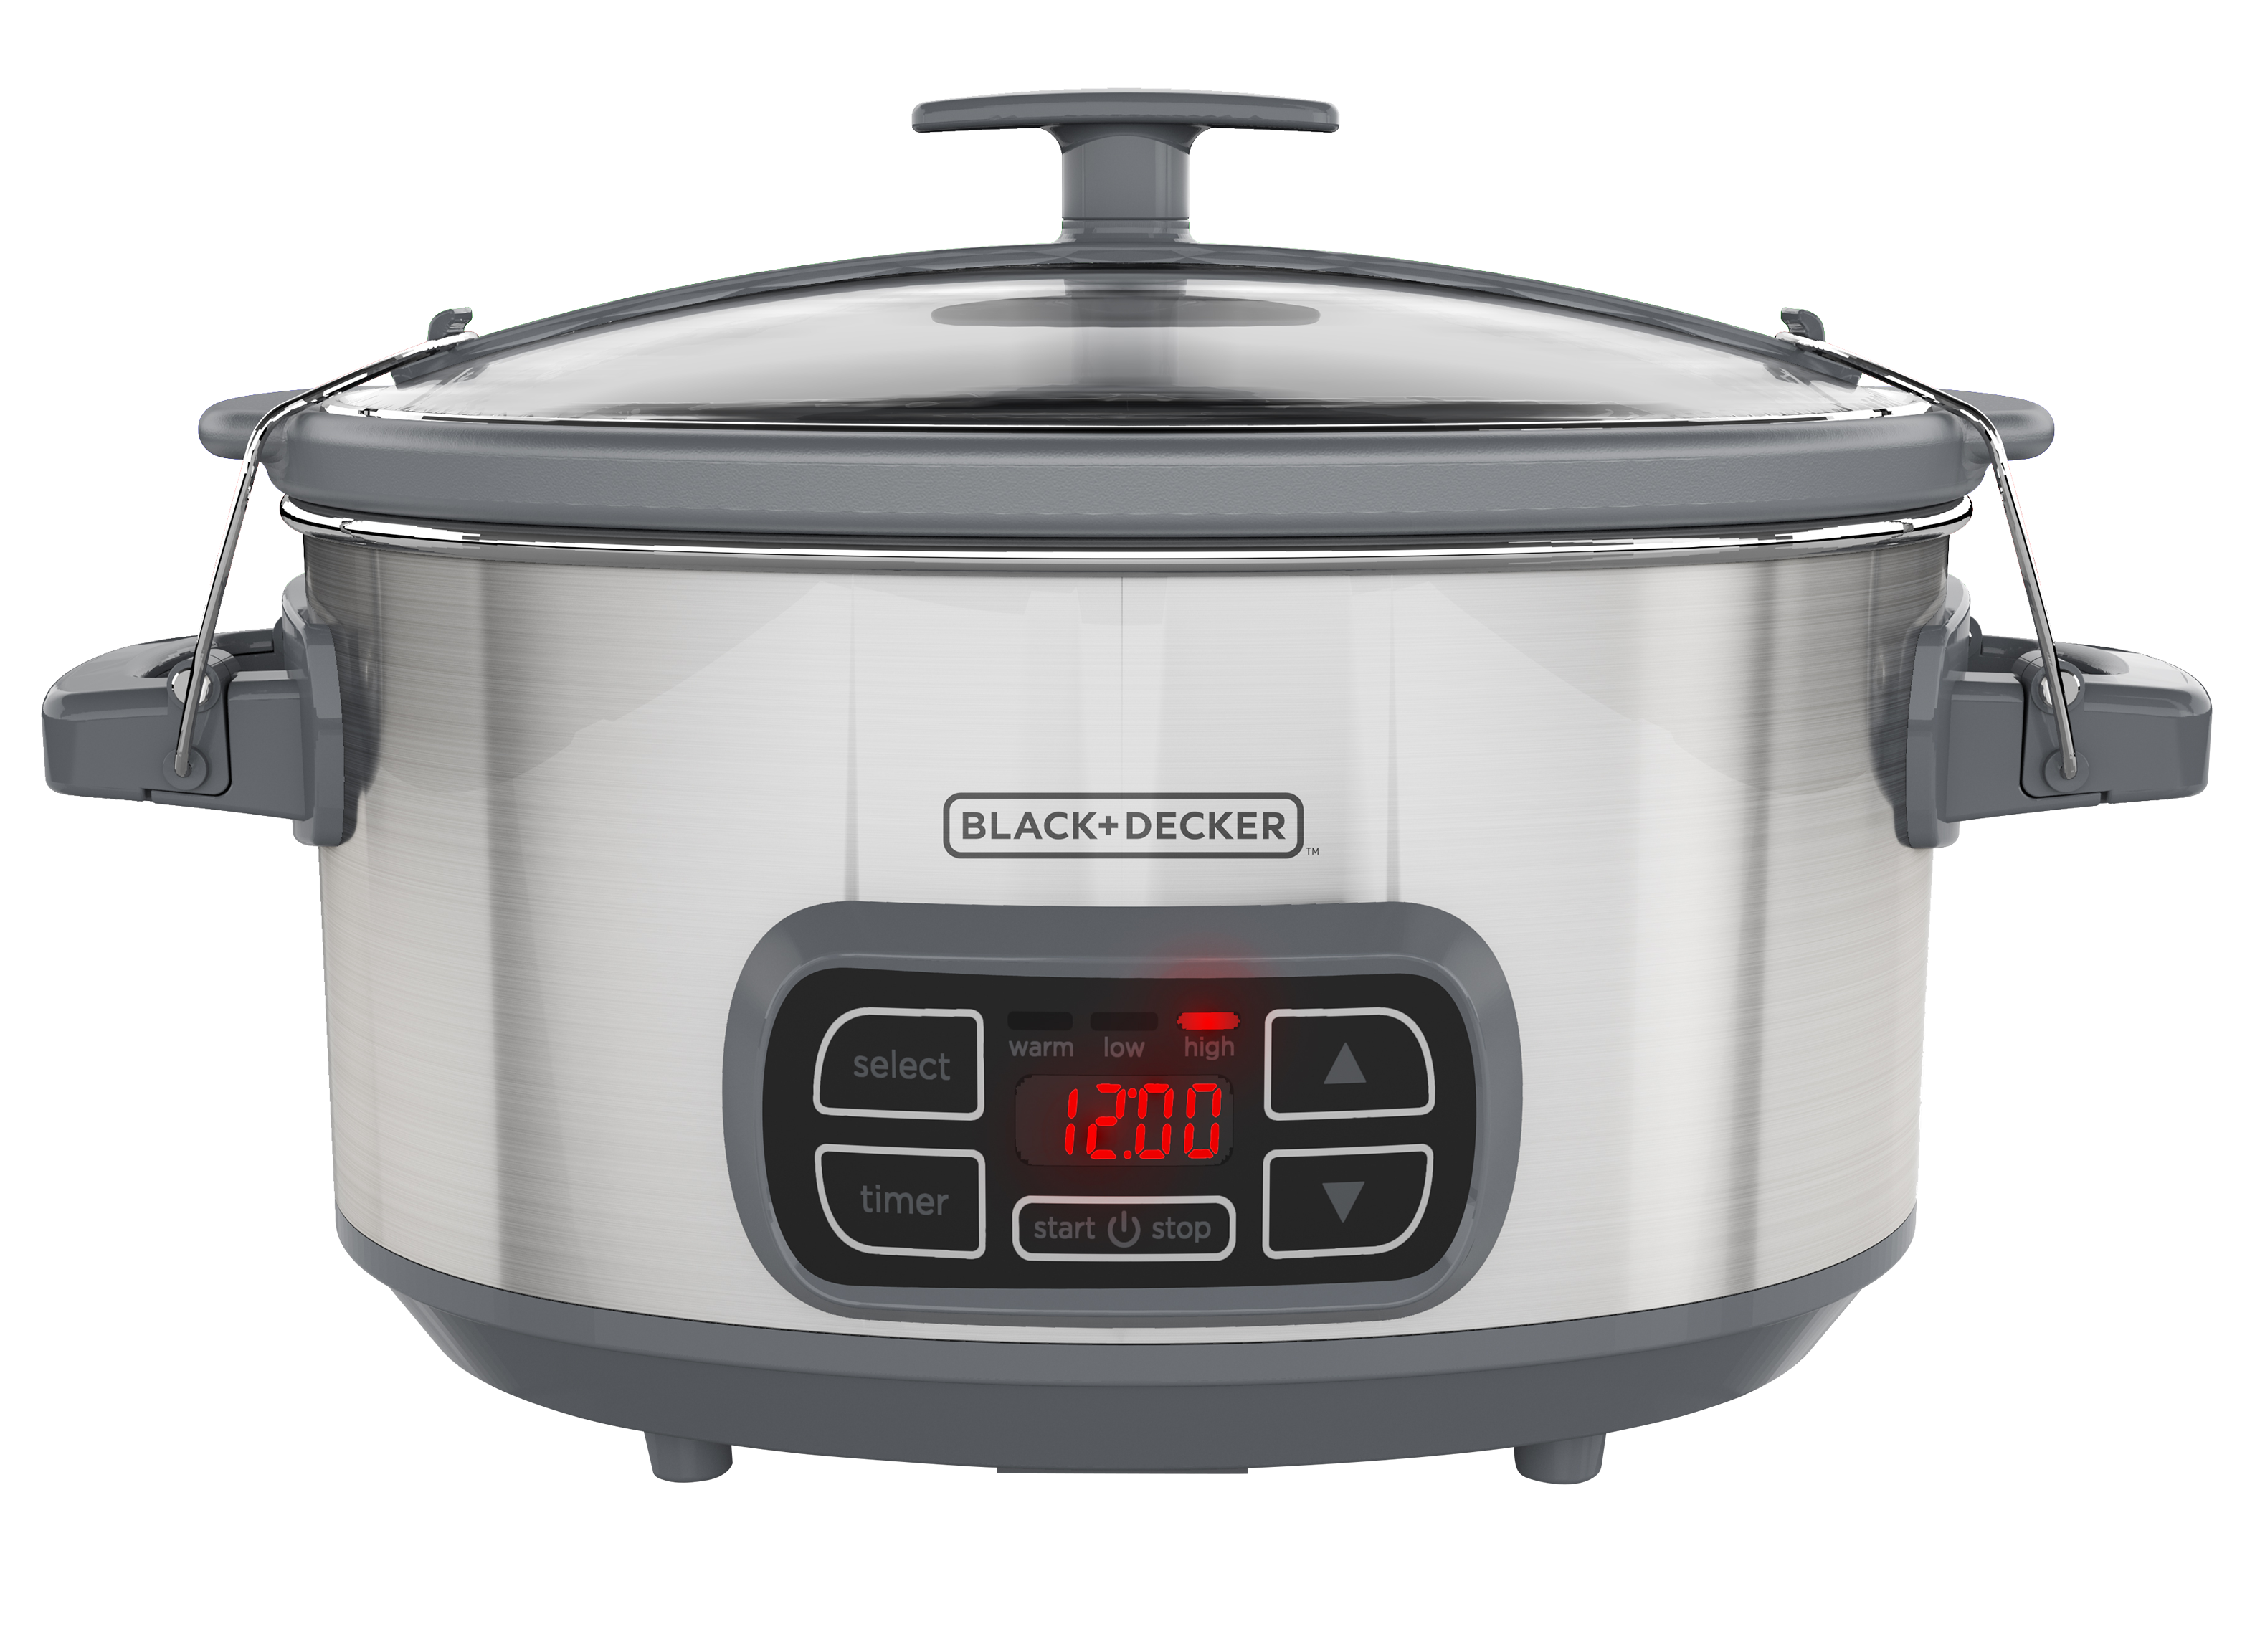 https://crdms.images.consumerreports.org/prod/products/cr/models/397132-slow-cookers-black-decker-7-quart-digital-programmable-slow-cooker-scd1007-10001052.png